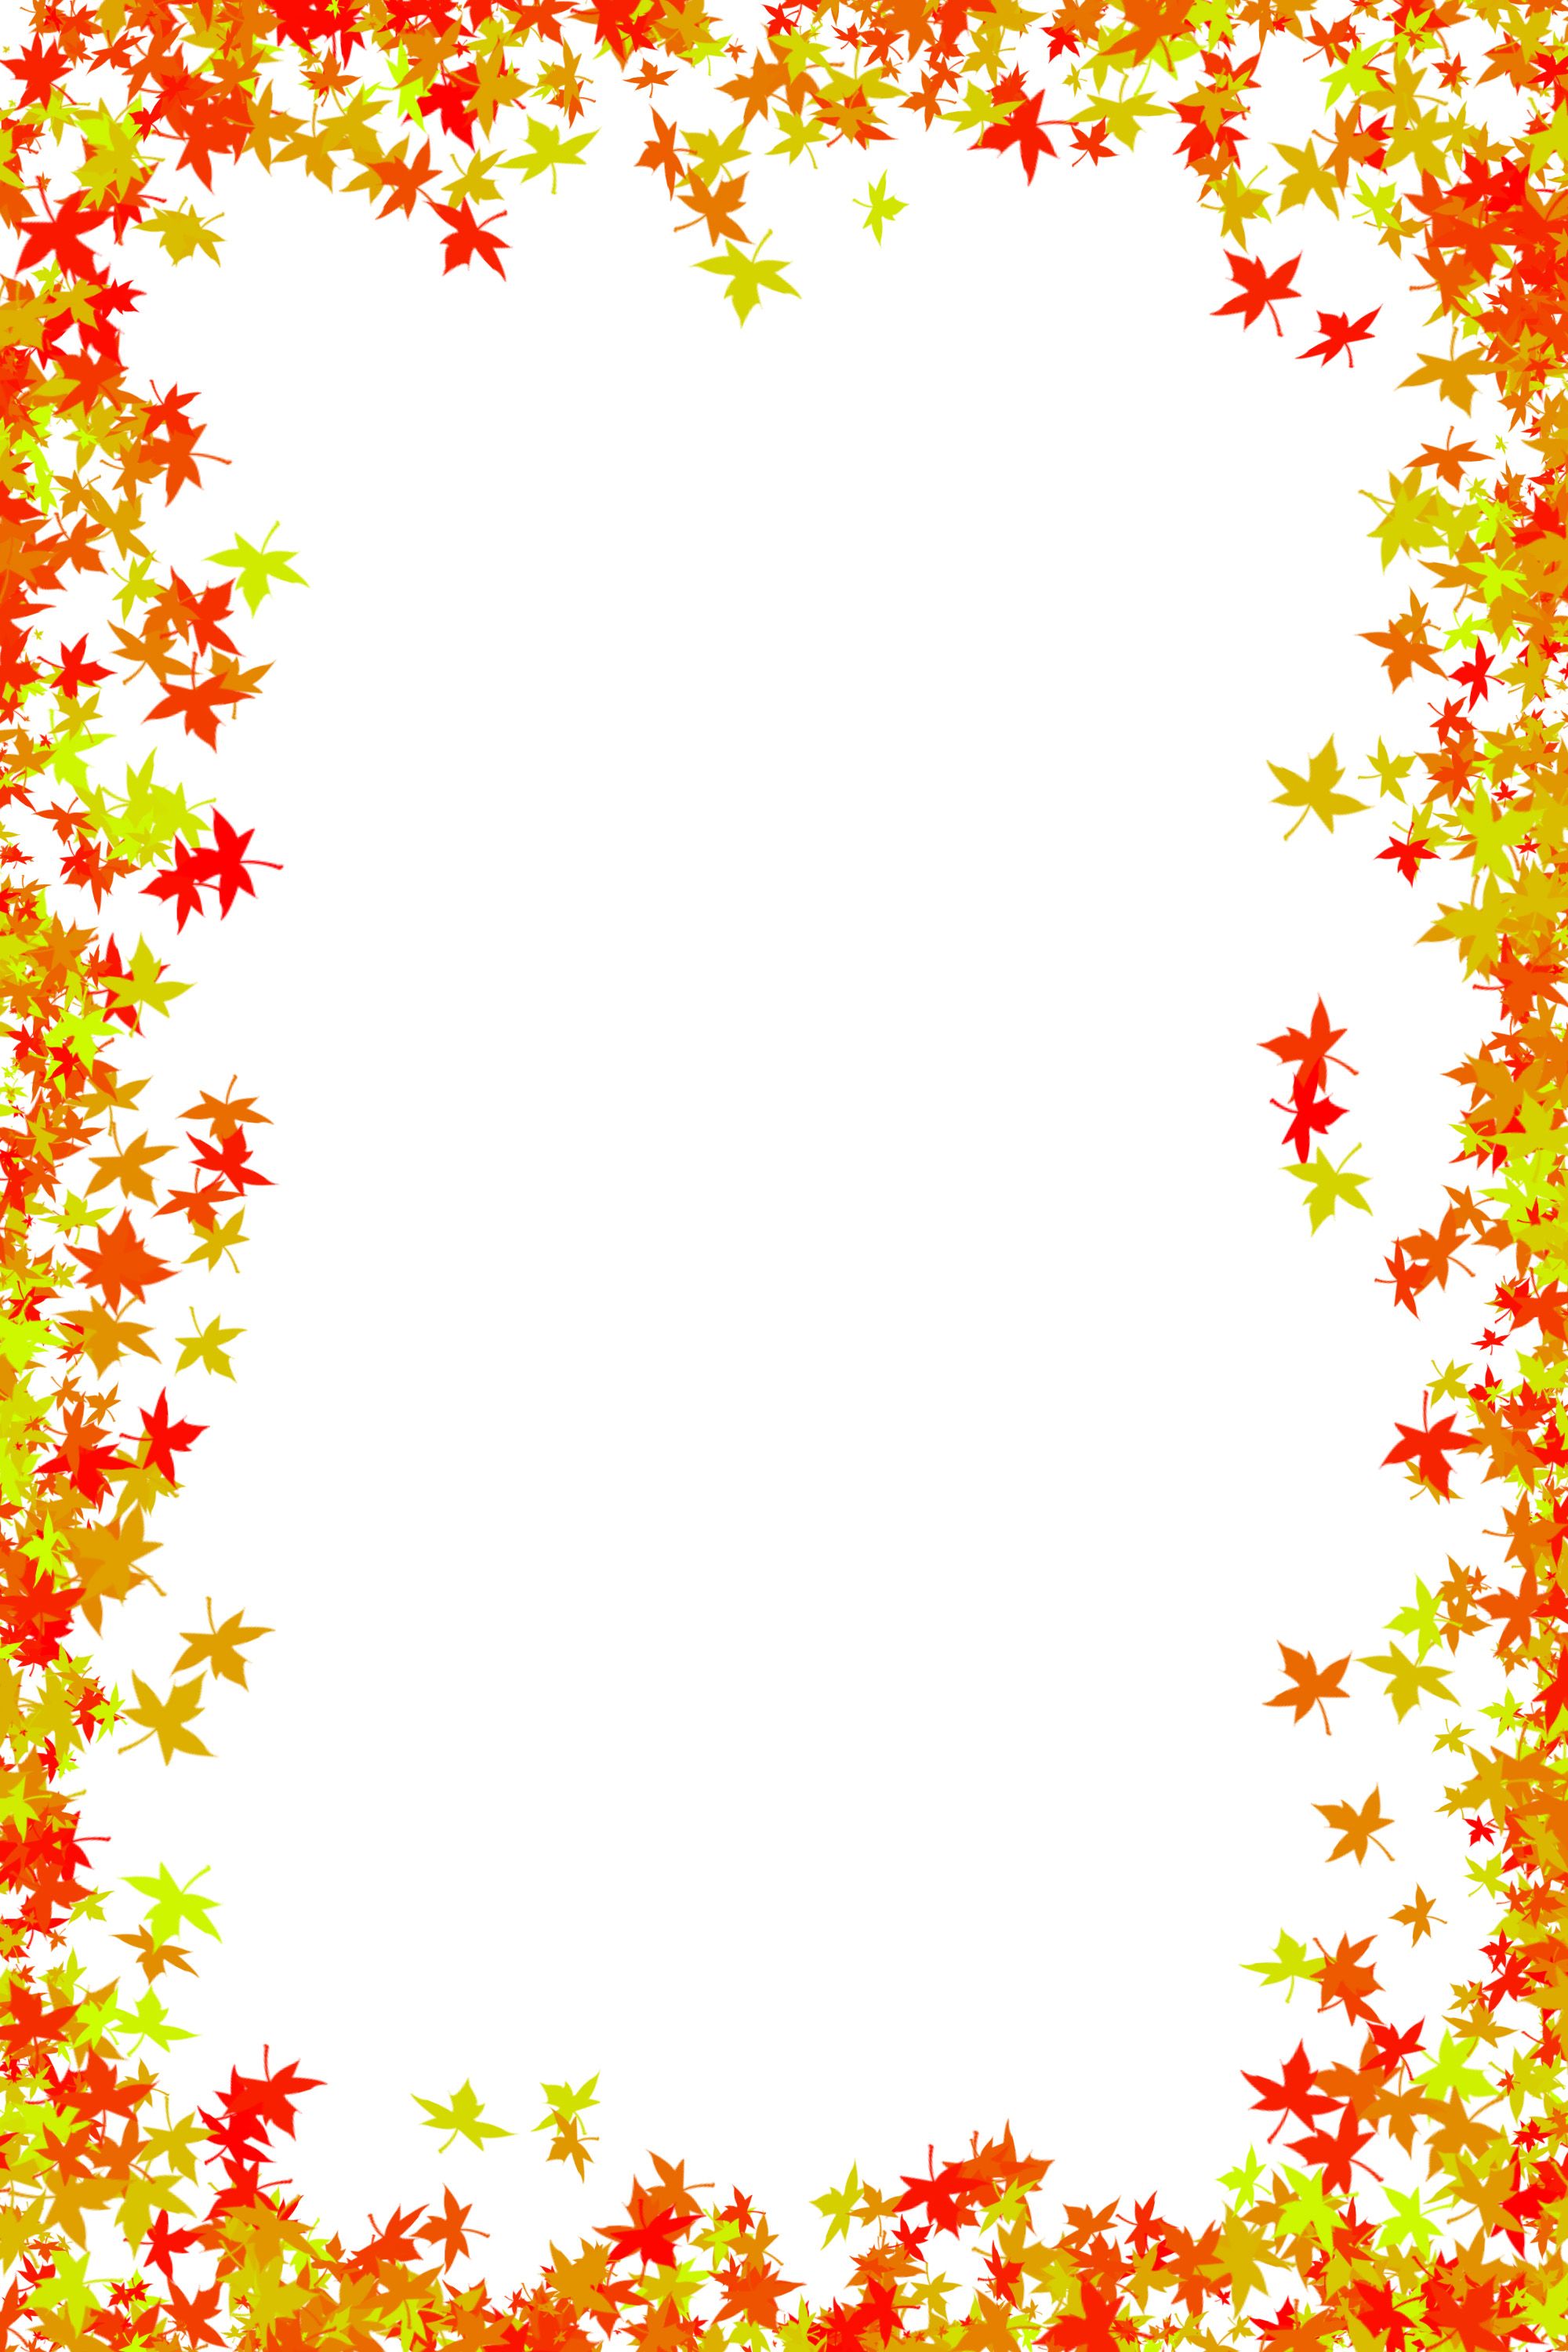 Fall Foliage Border Free | download photo frame of maple leaves in ...